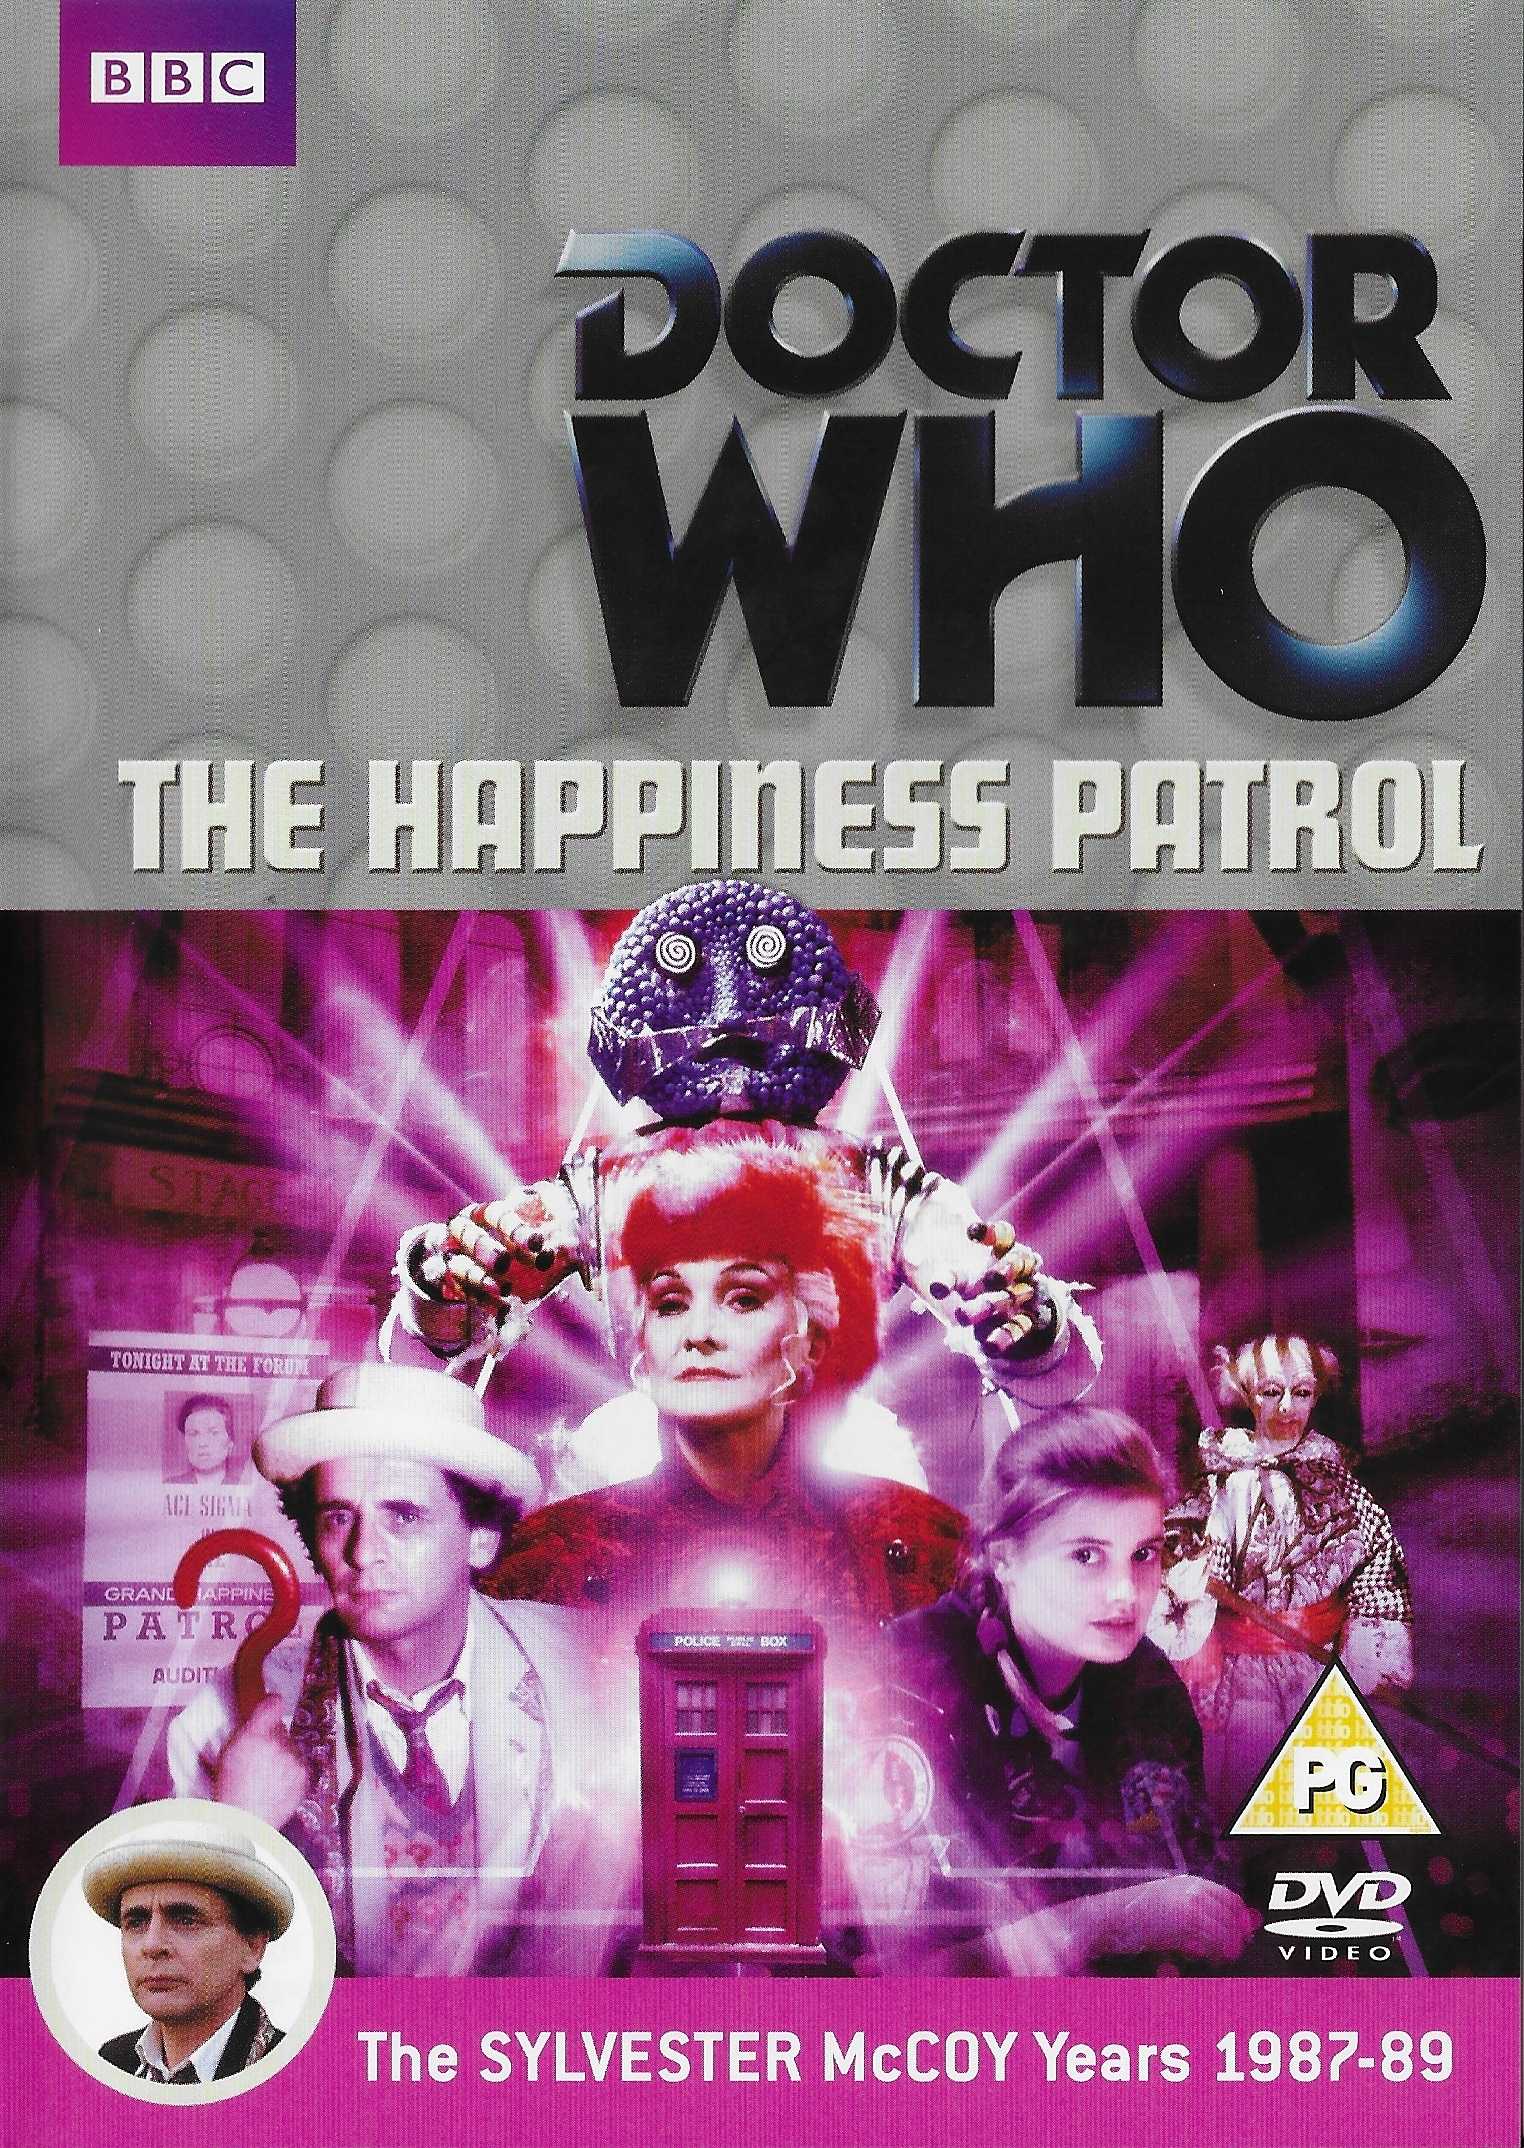 Picture of BBCDVD 3387B Doctor Who - The happiness patrol by artist Graeme Curry from the BBC records and Tapes library